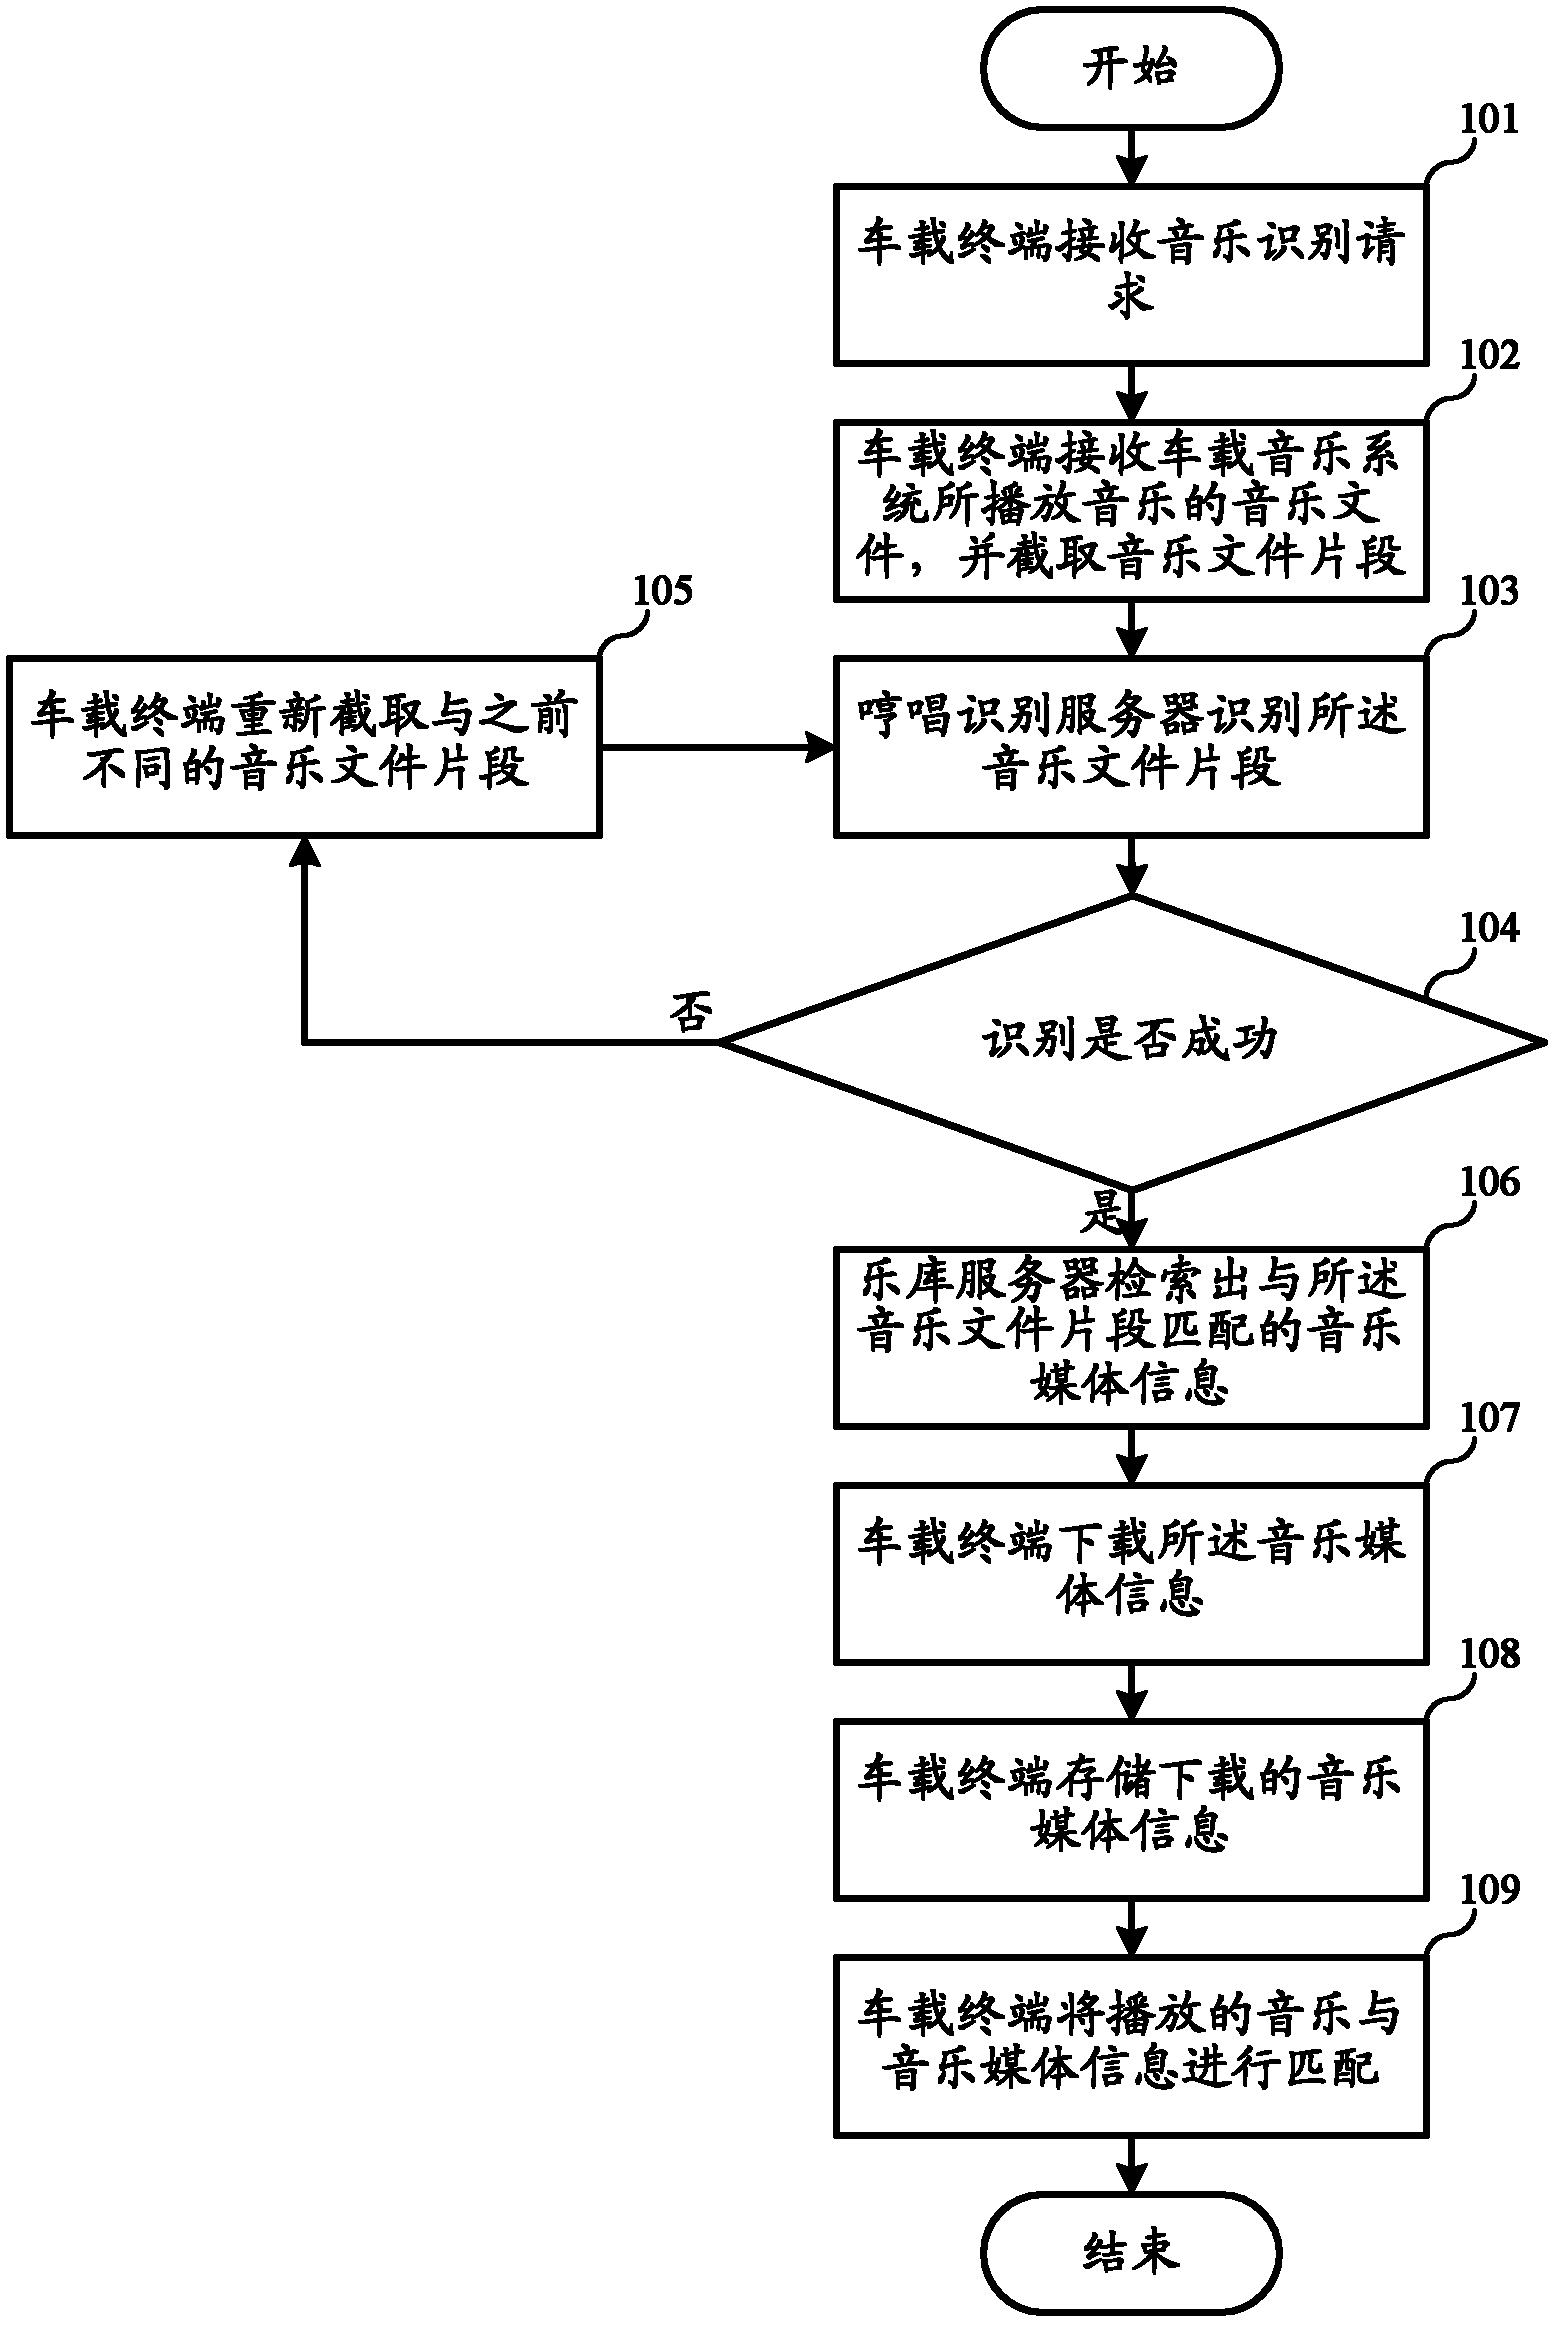 Music media information acquiring method and system of vehicle-mounted music system